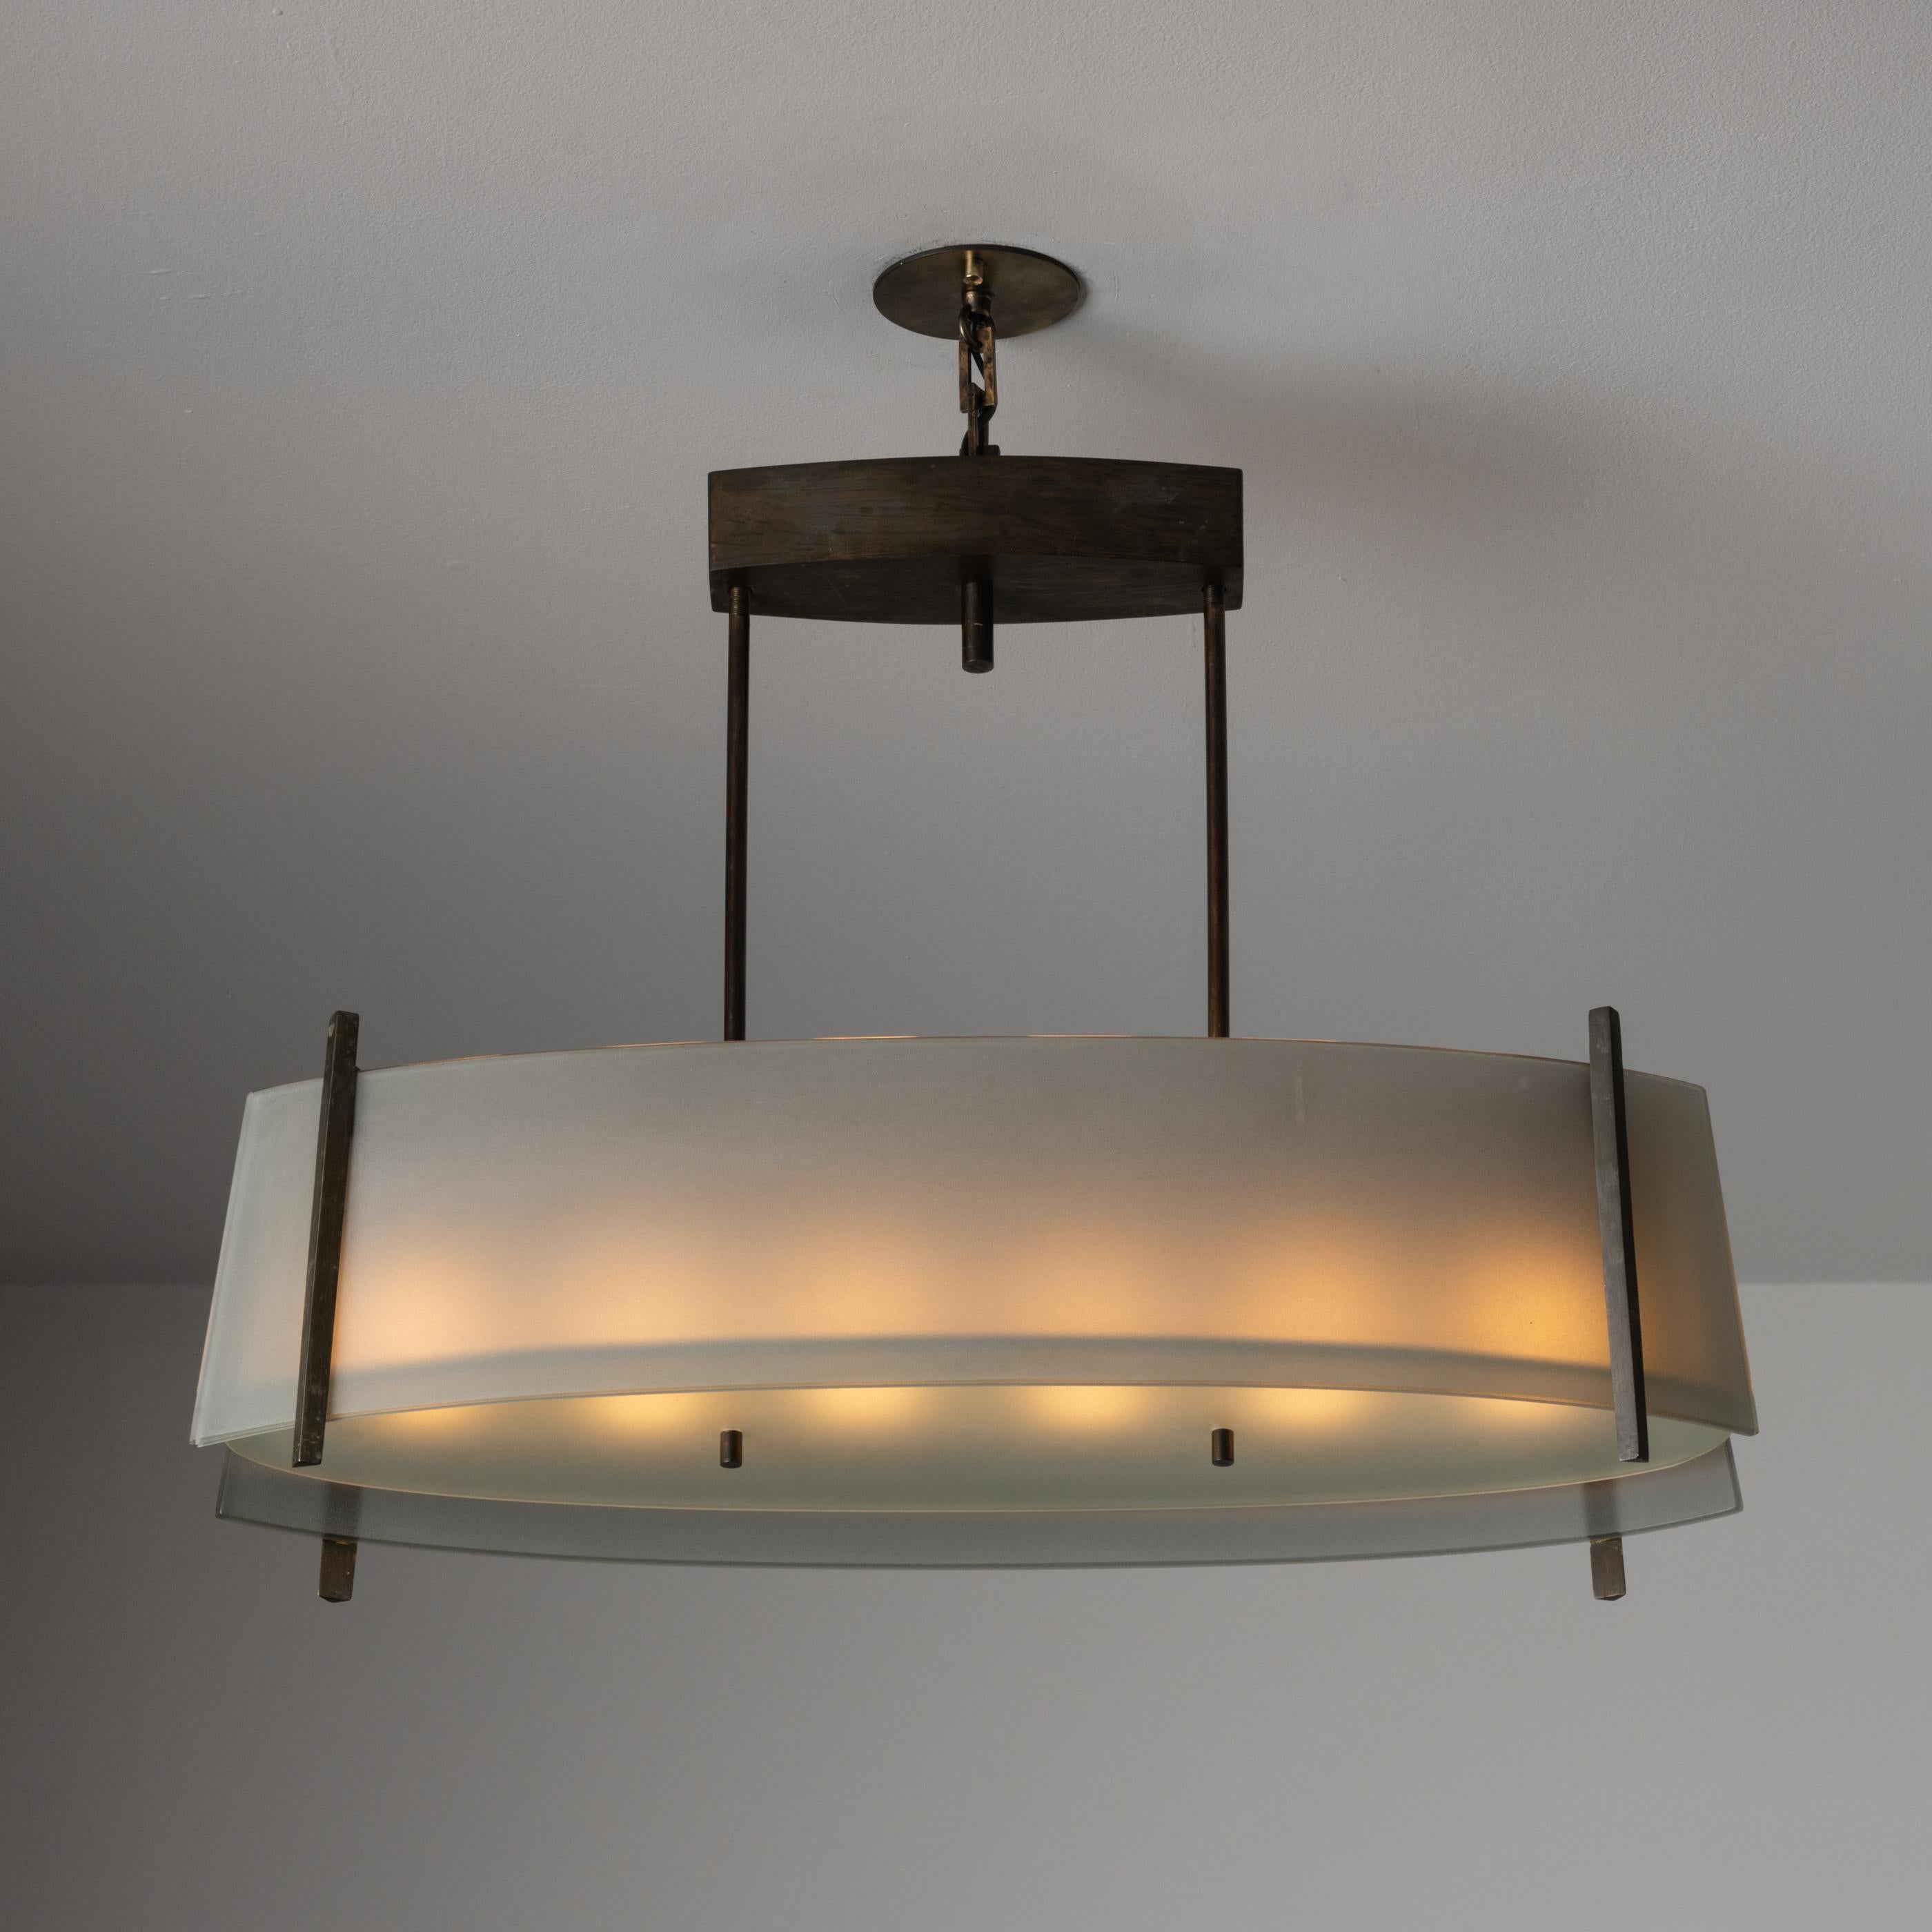 Suspension light by Fontana Arte. Designed and Manufactured in Italy, circa the 1950s. Clear sandblasted glass shade with aged brass framing. Suspended by a brass chain and custom canopy. Holds six E14 sockets. Bulbs recommended consist of six E14